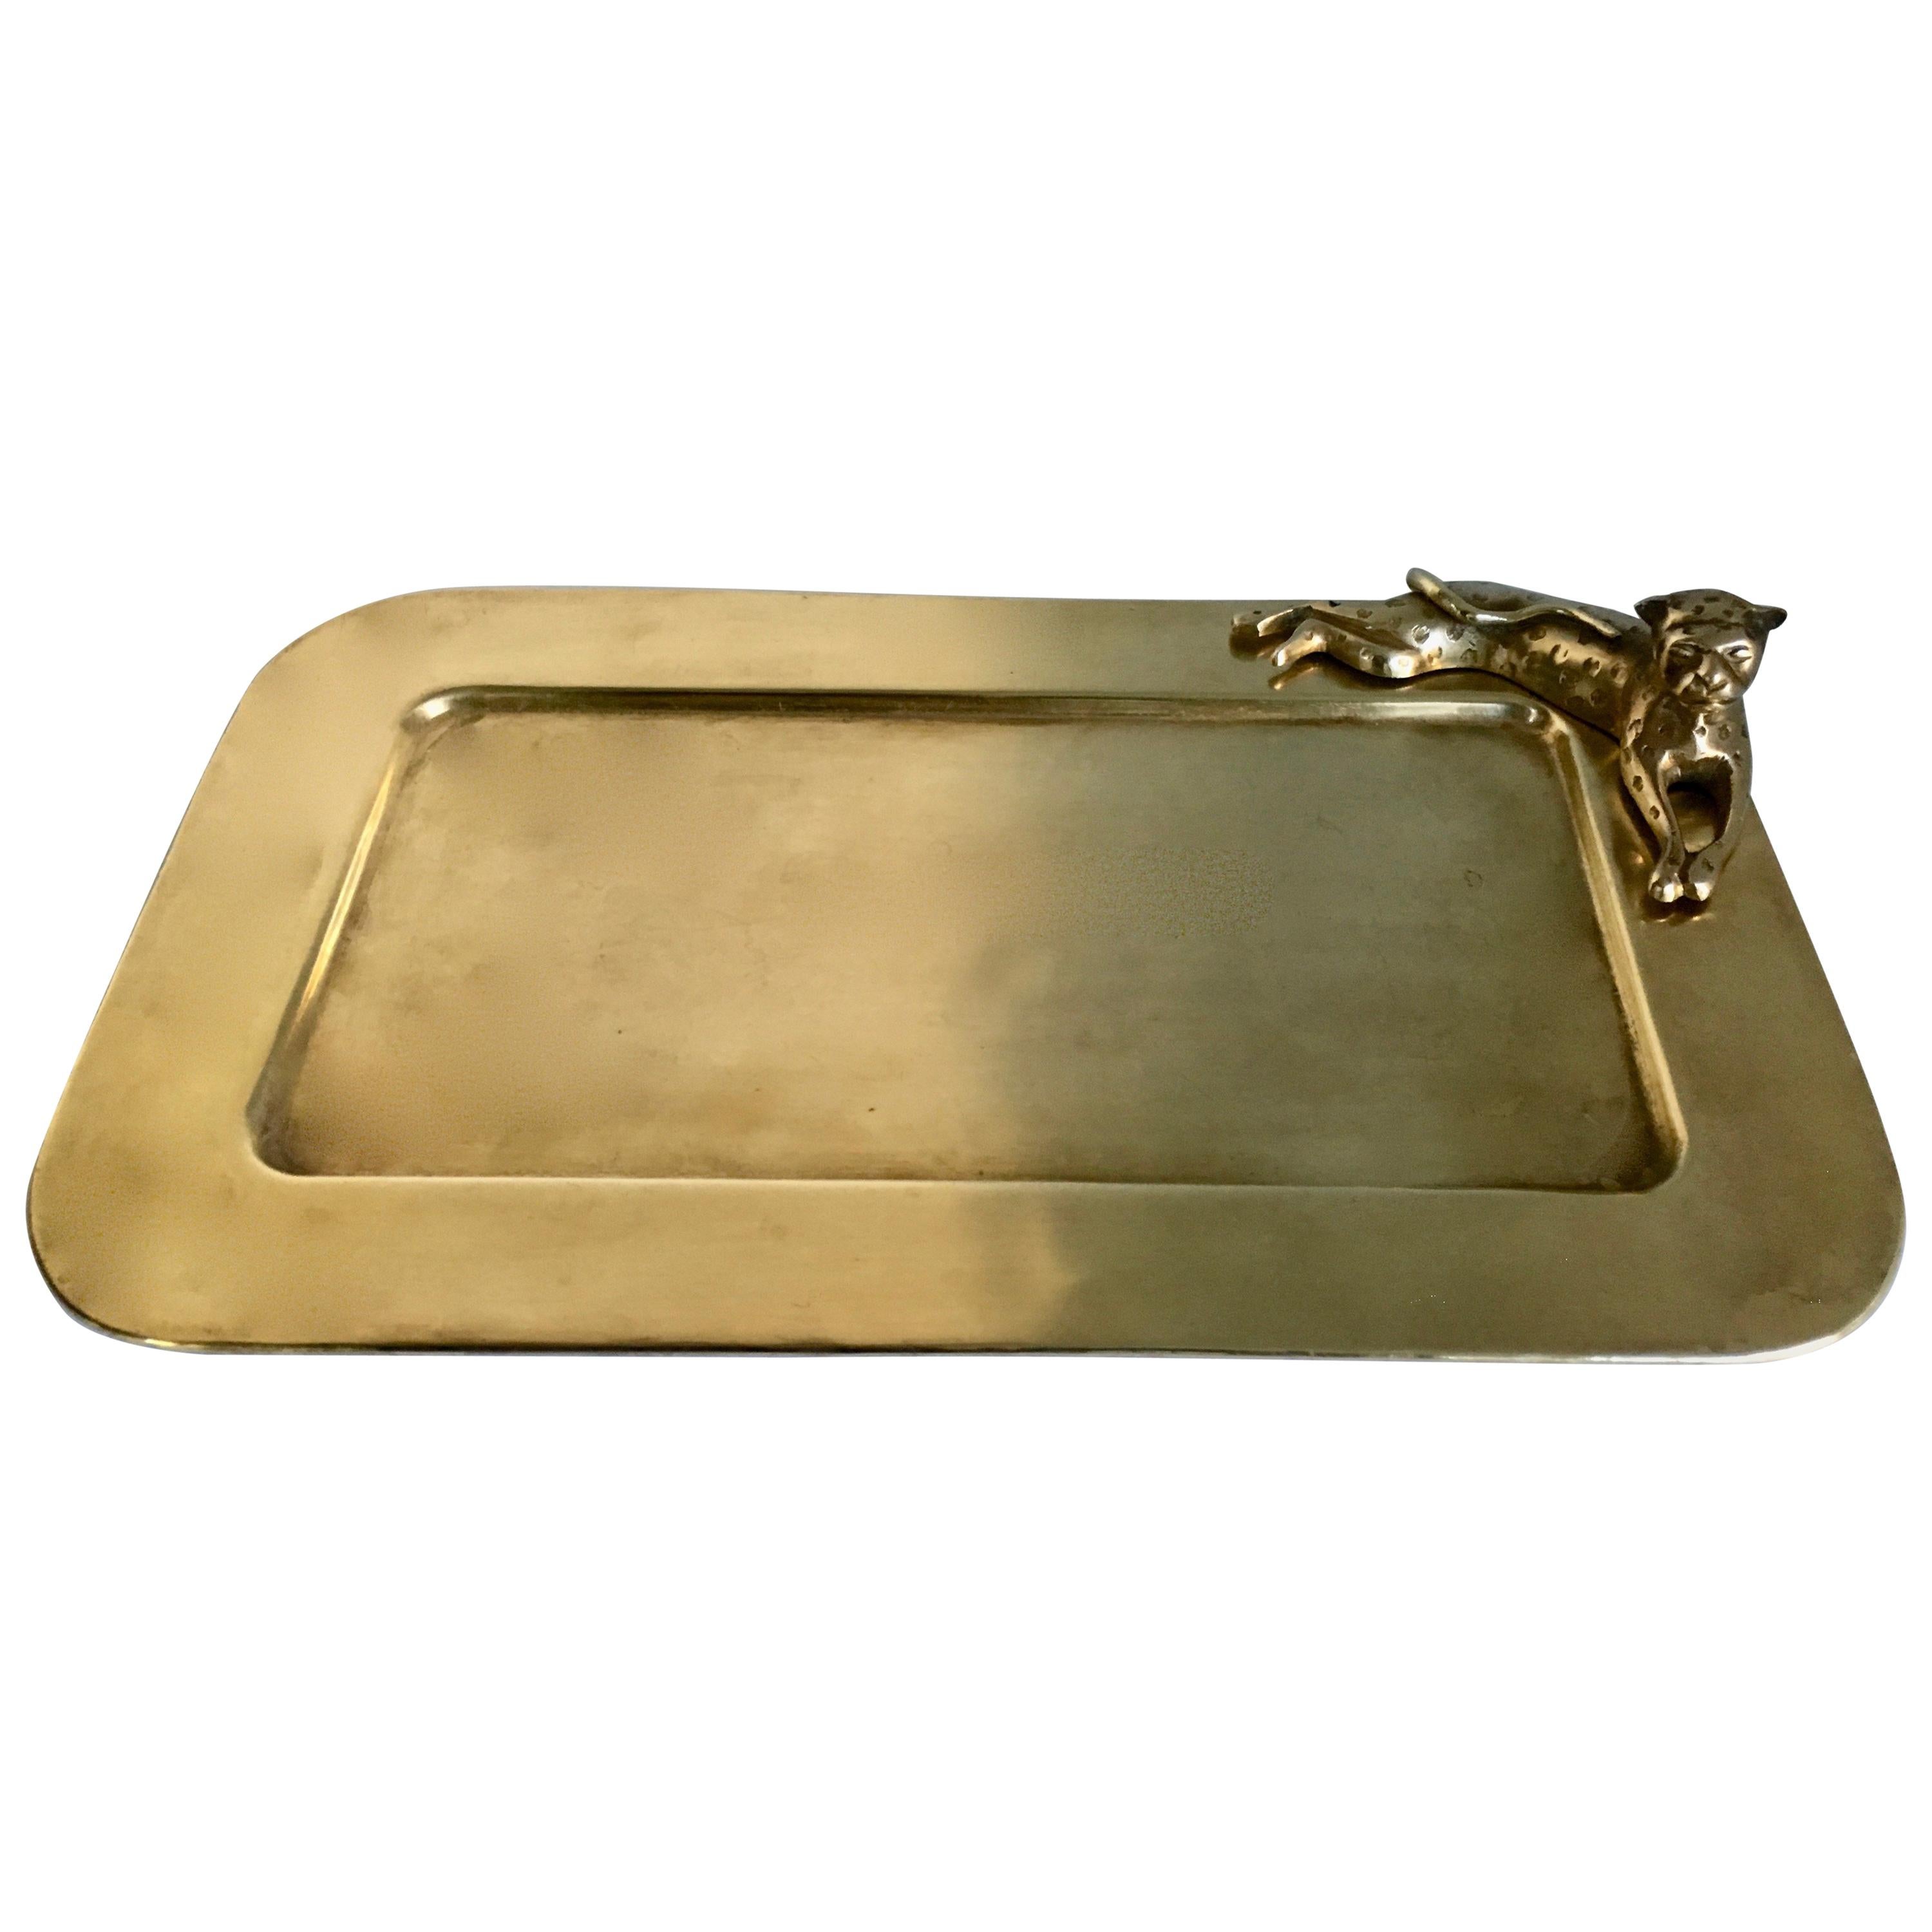 Brass Tray with Cheetah Sculpture